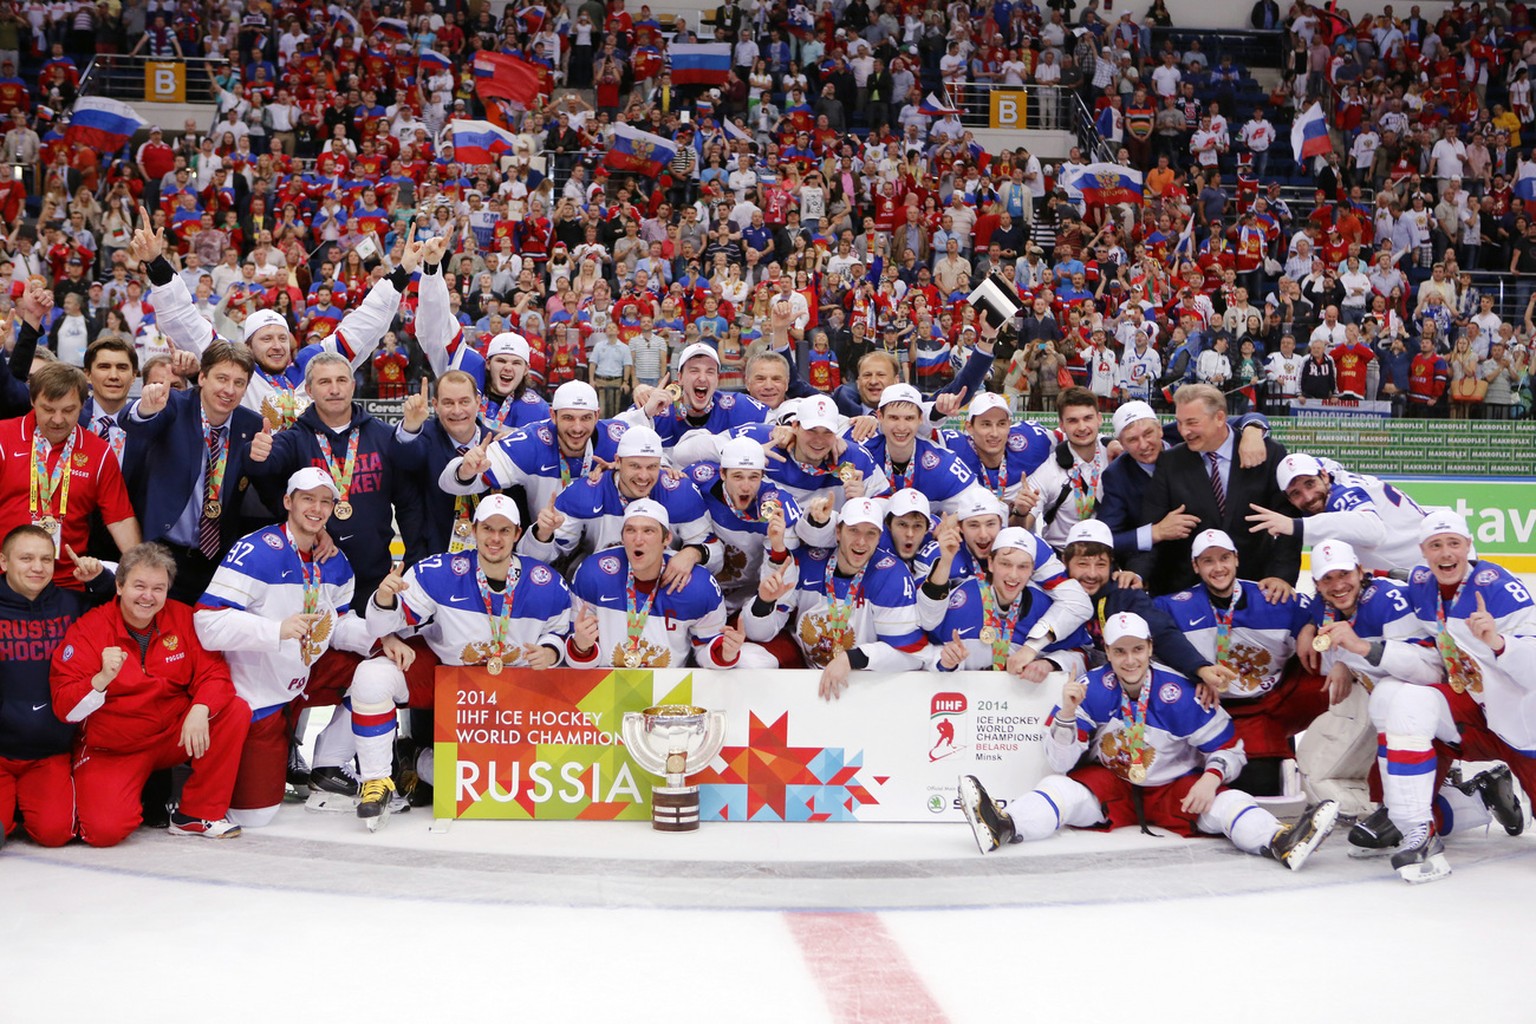 Russian players celebrate after Russia defeated Finland 5-2 in the gold medal match at the Ice Hockey World Championship in Minsk, Belarus, Sunday, May 25, 2014. (AP Photo/Darko Bandic)